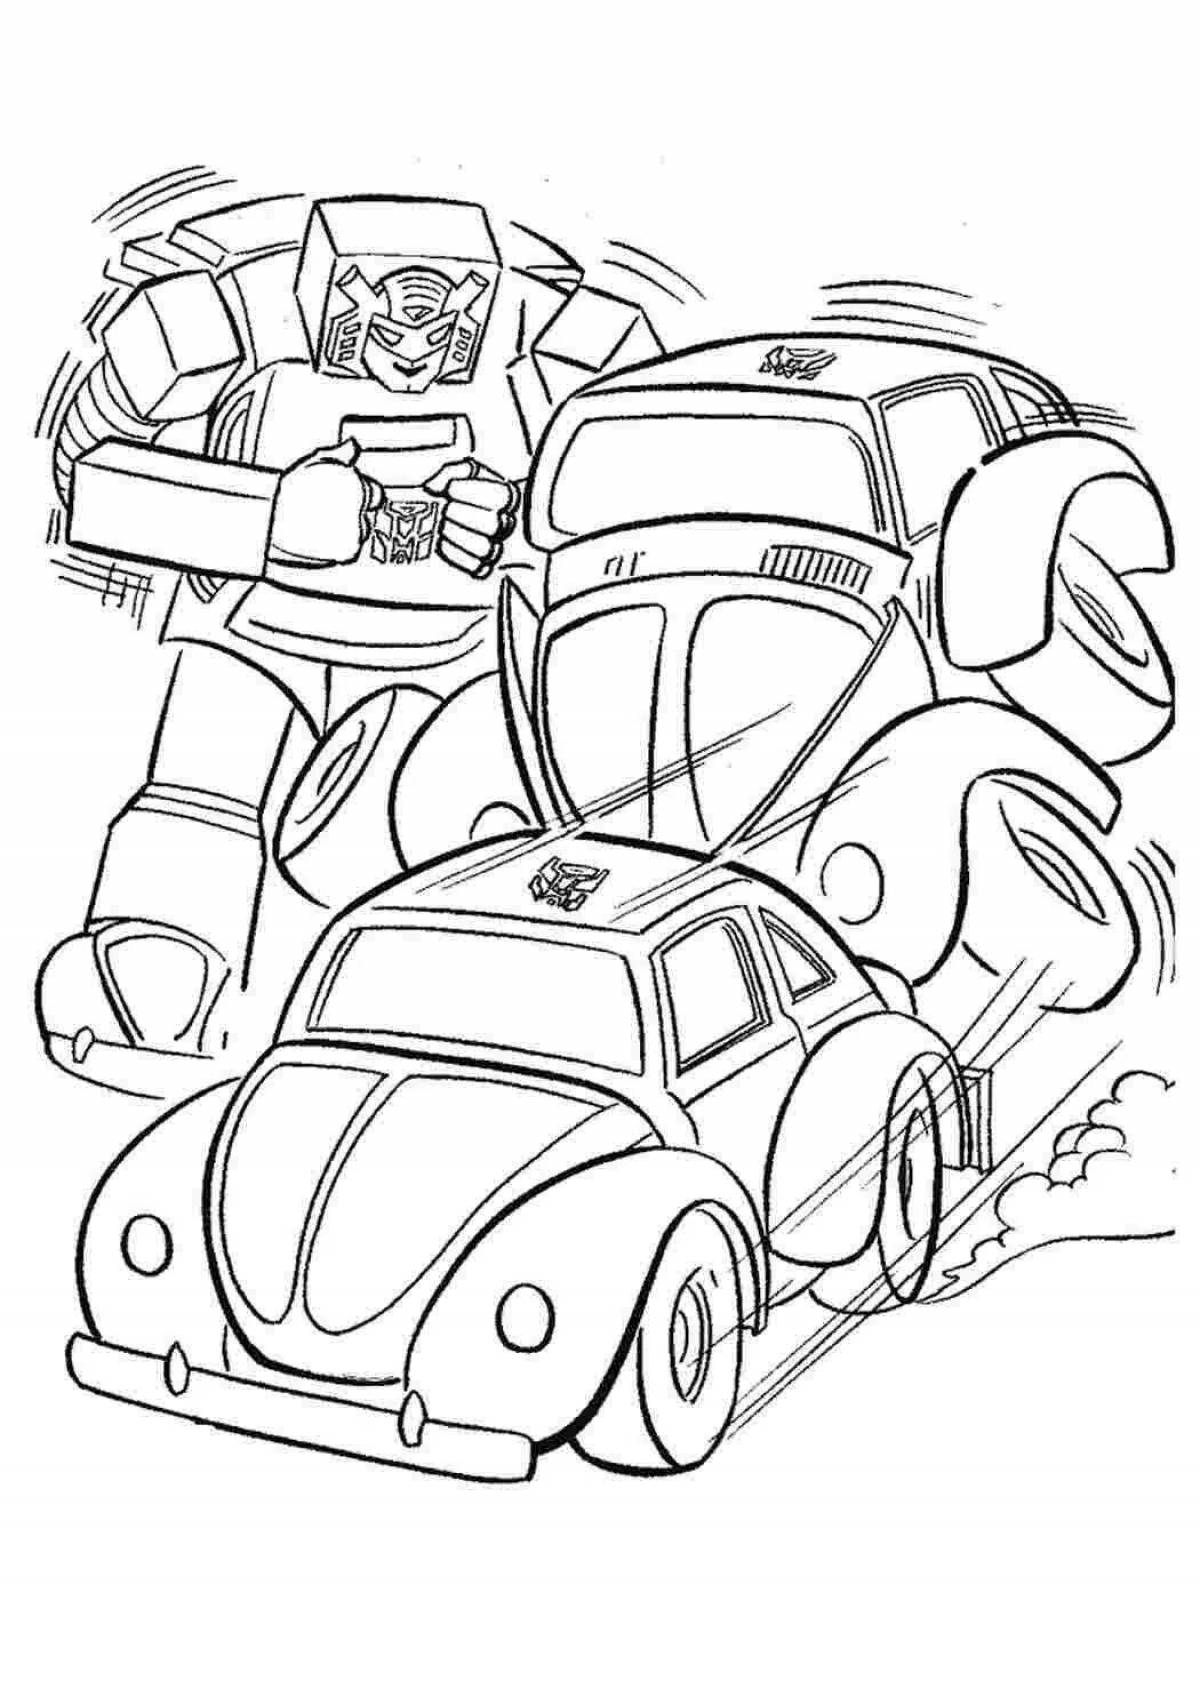 Sweet car transformer coloring page